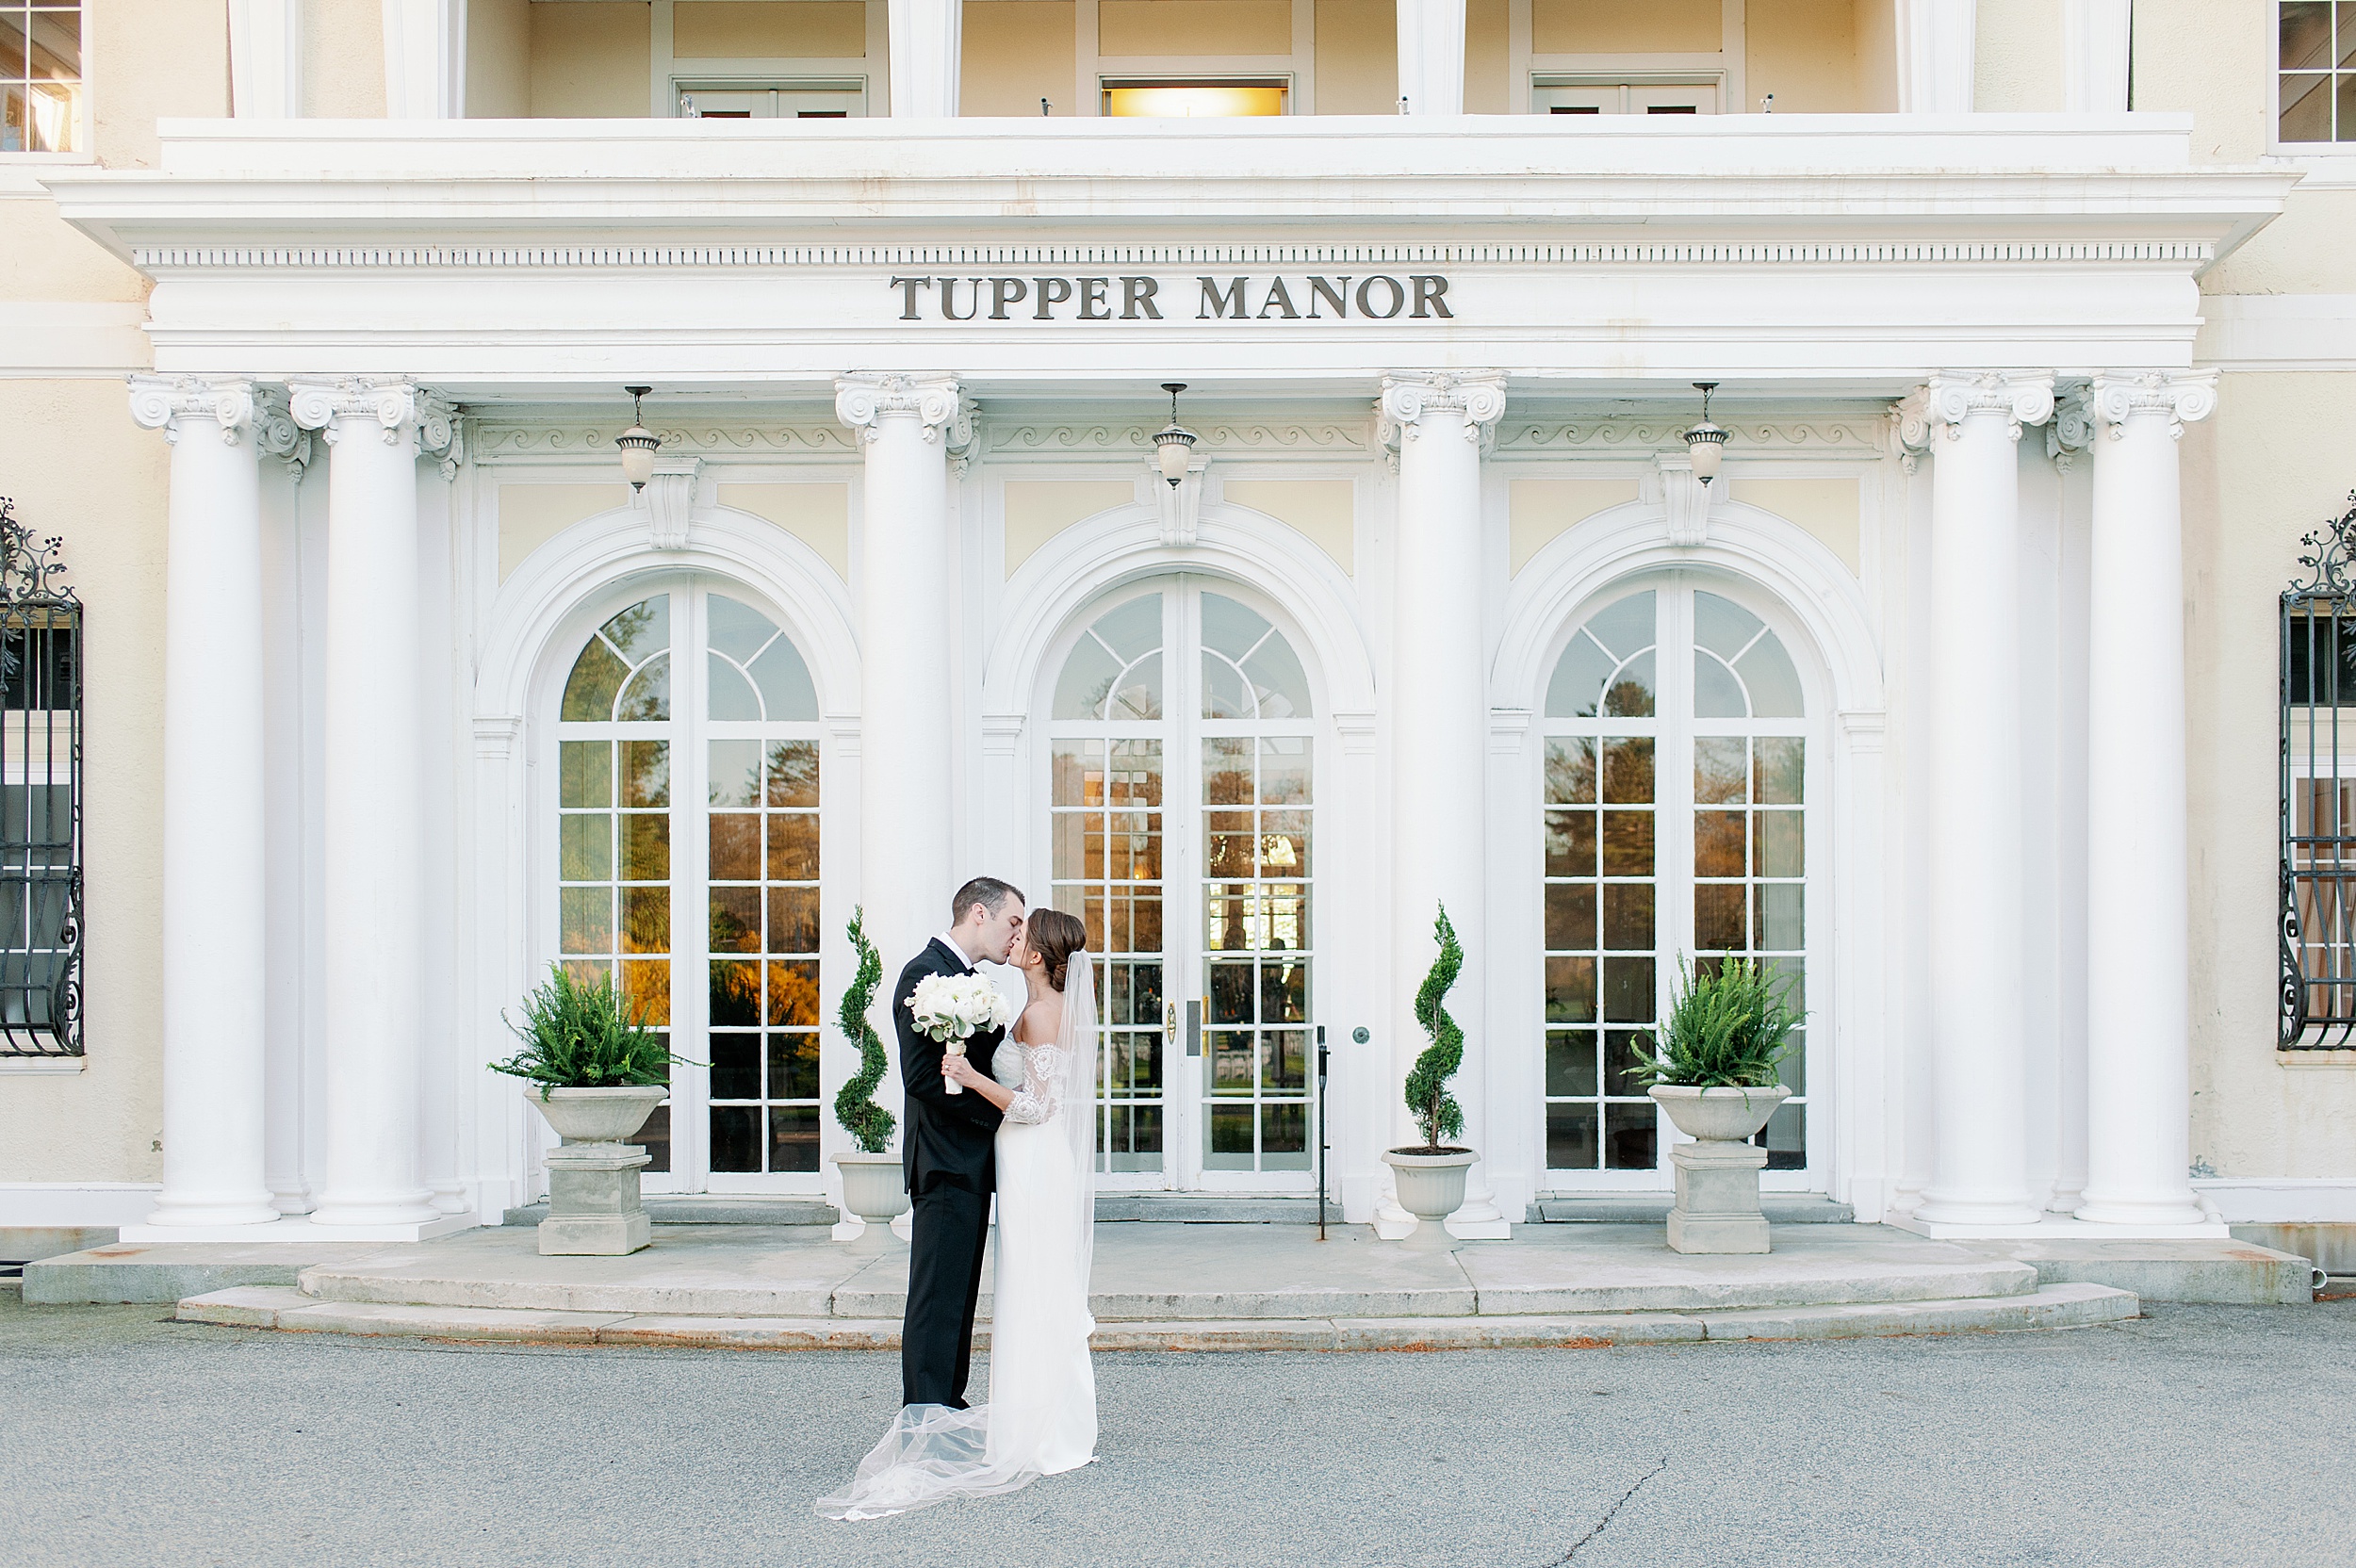 Newlyweds pose for portraits at Tupper Manor Wedding